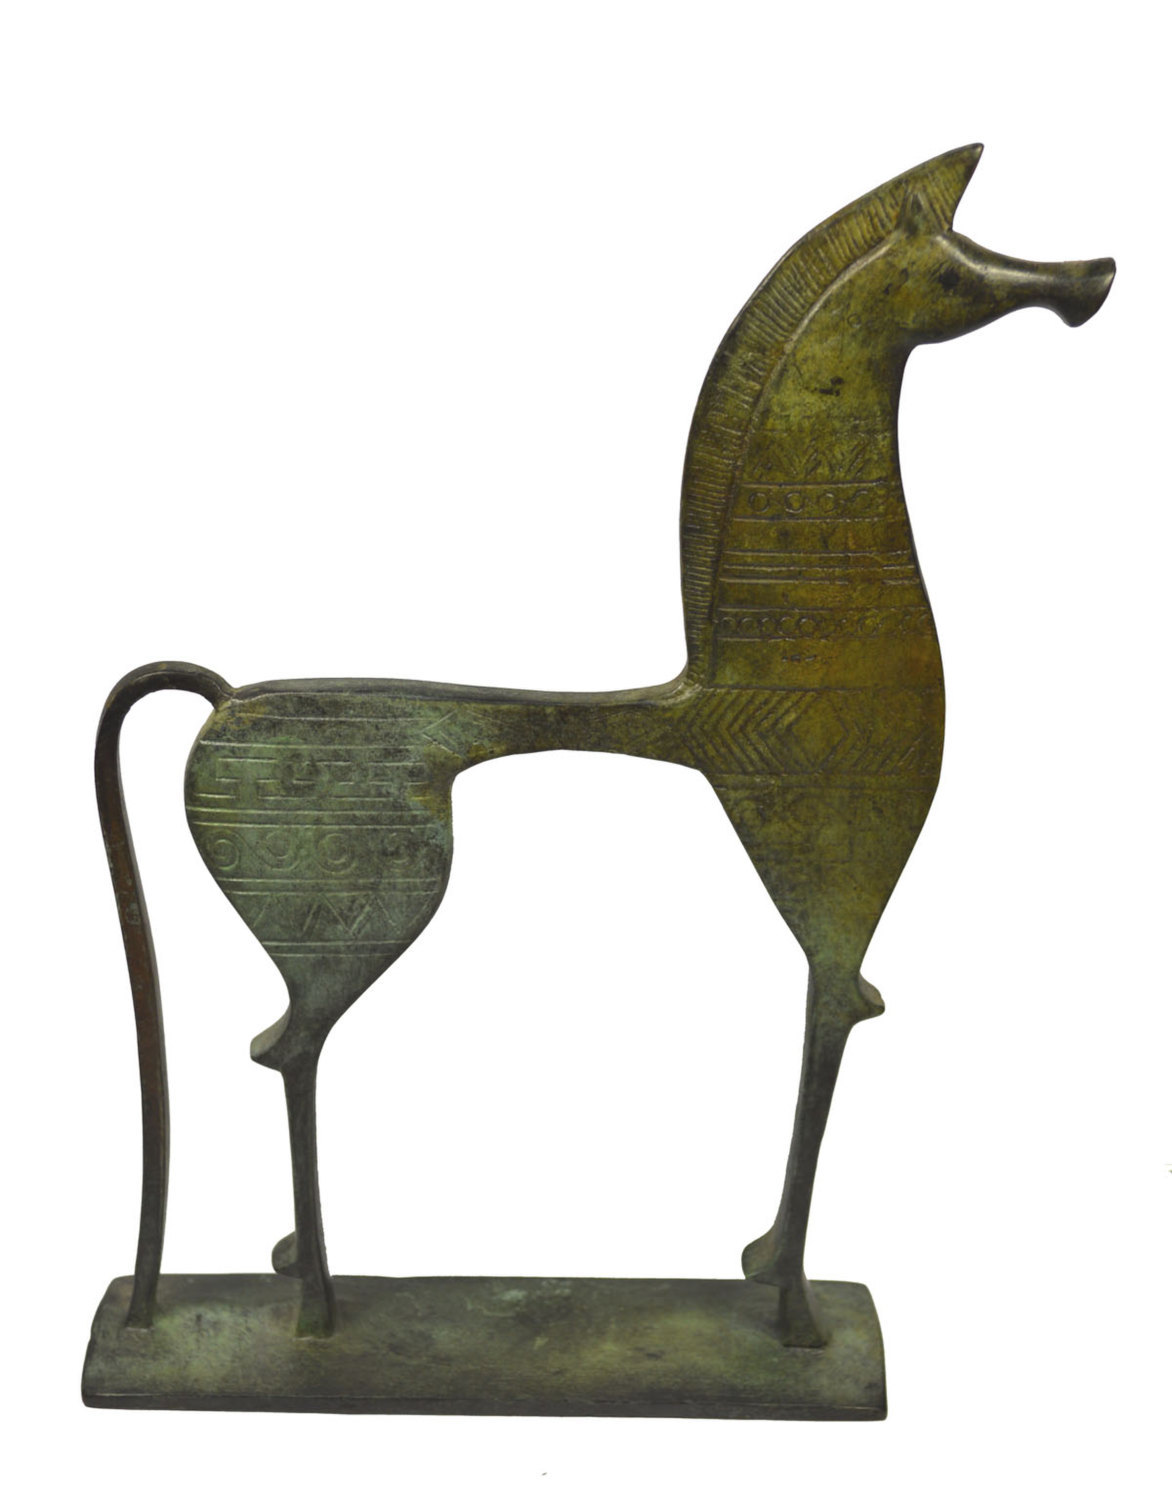 Horse statue with geometric carvings ancient Greek bronze reproduction sculpture - $99.00